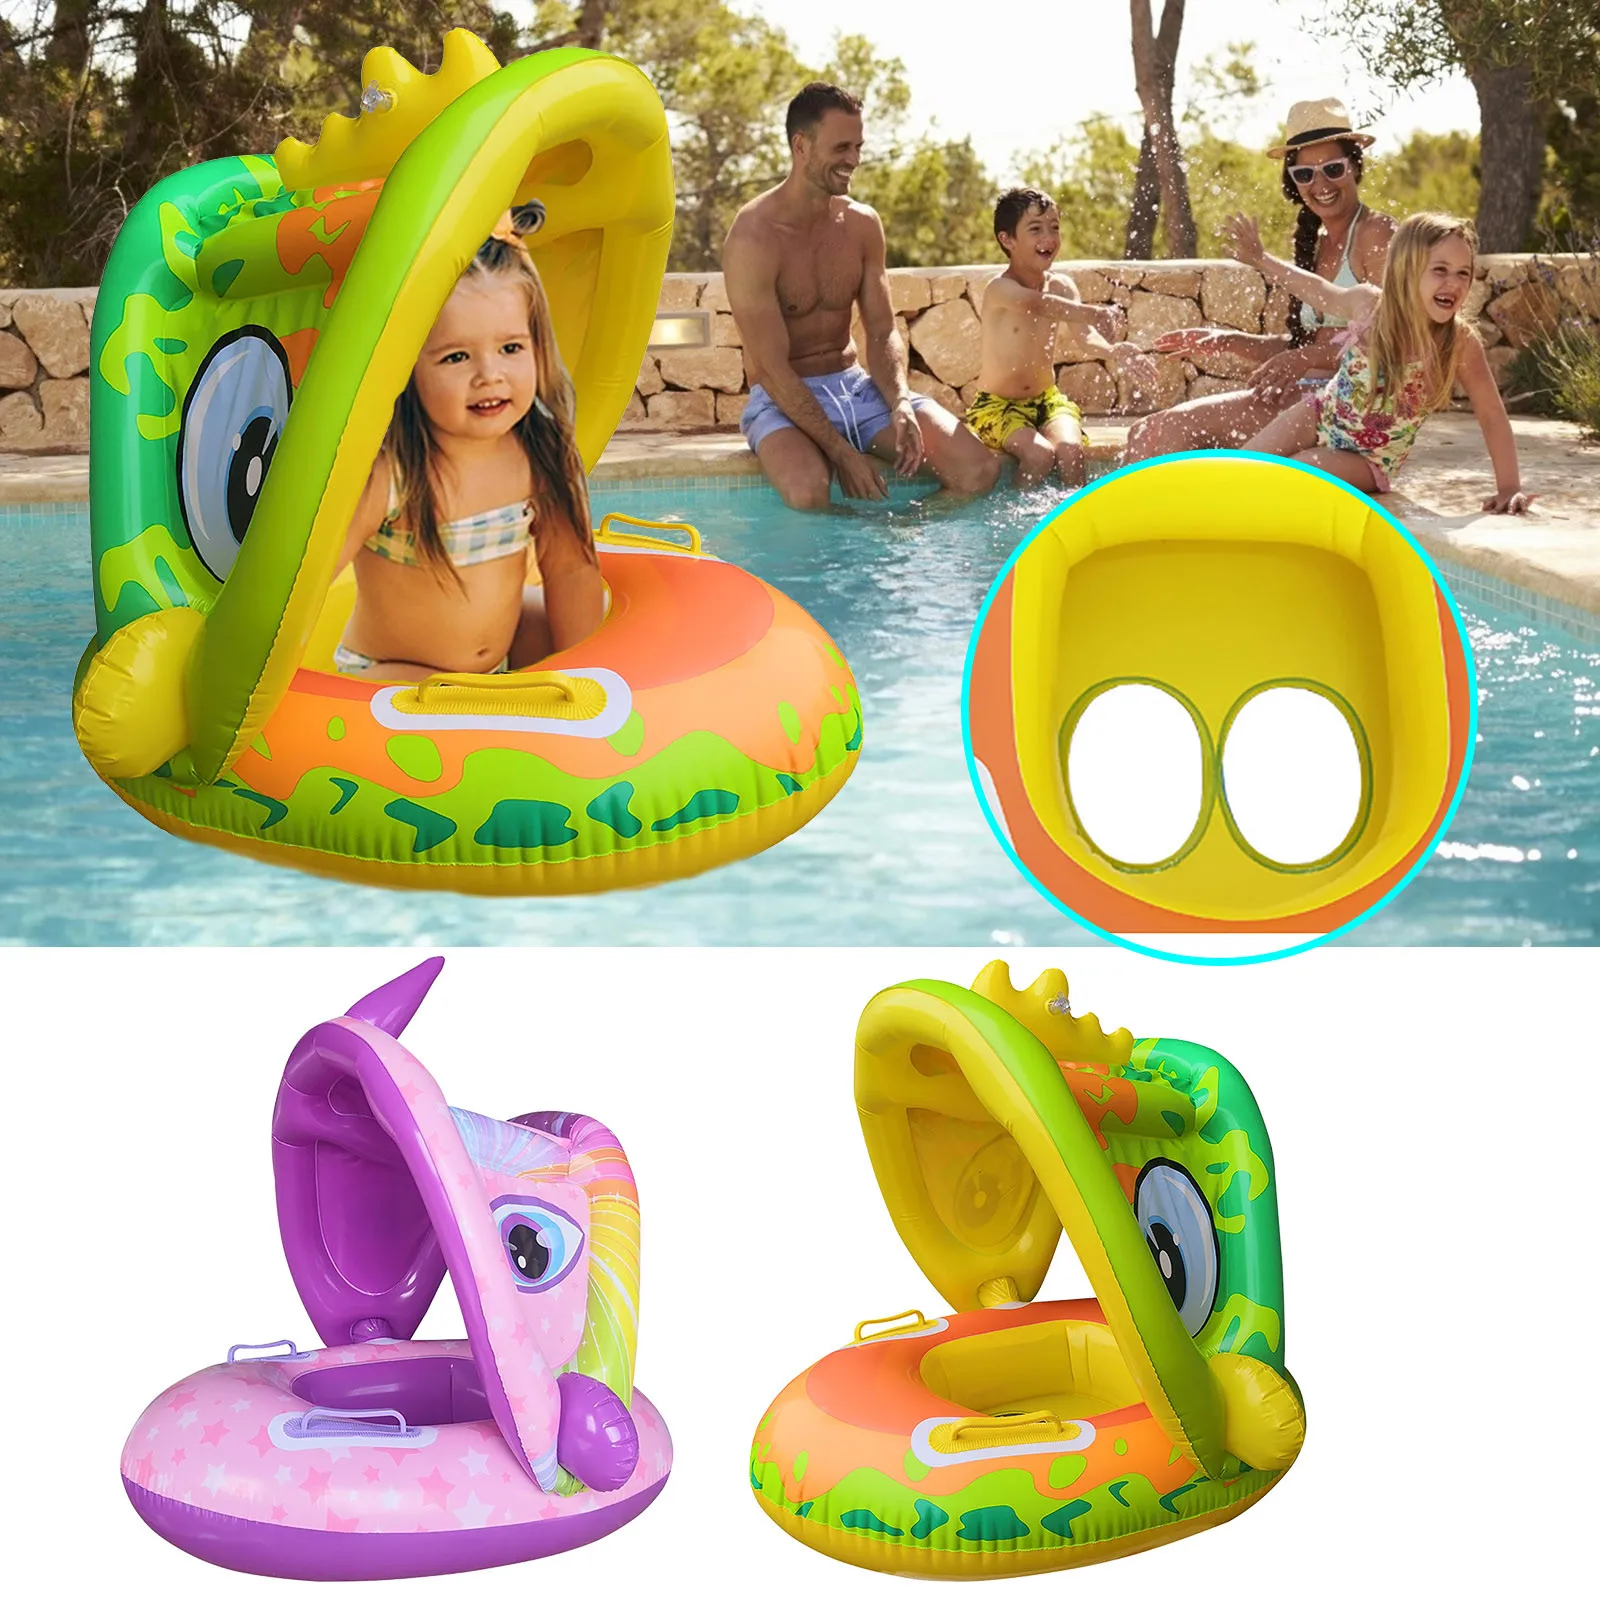 

Rainbow Unicorn Baby Water Floats Toys Swimming Pool Ring with Inflatable Canopy Pool Float for Baby Kids Infant Aged 36 Months